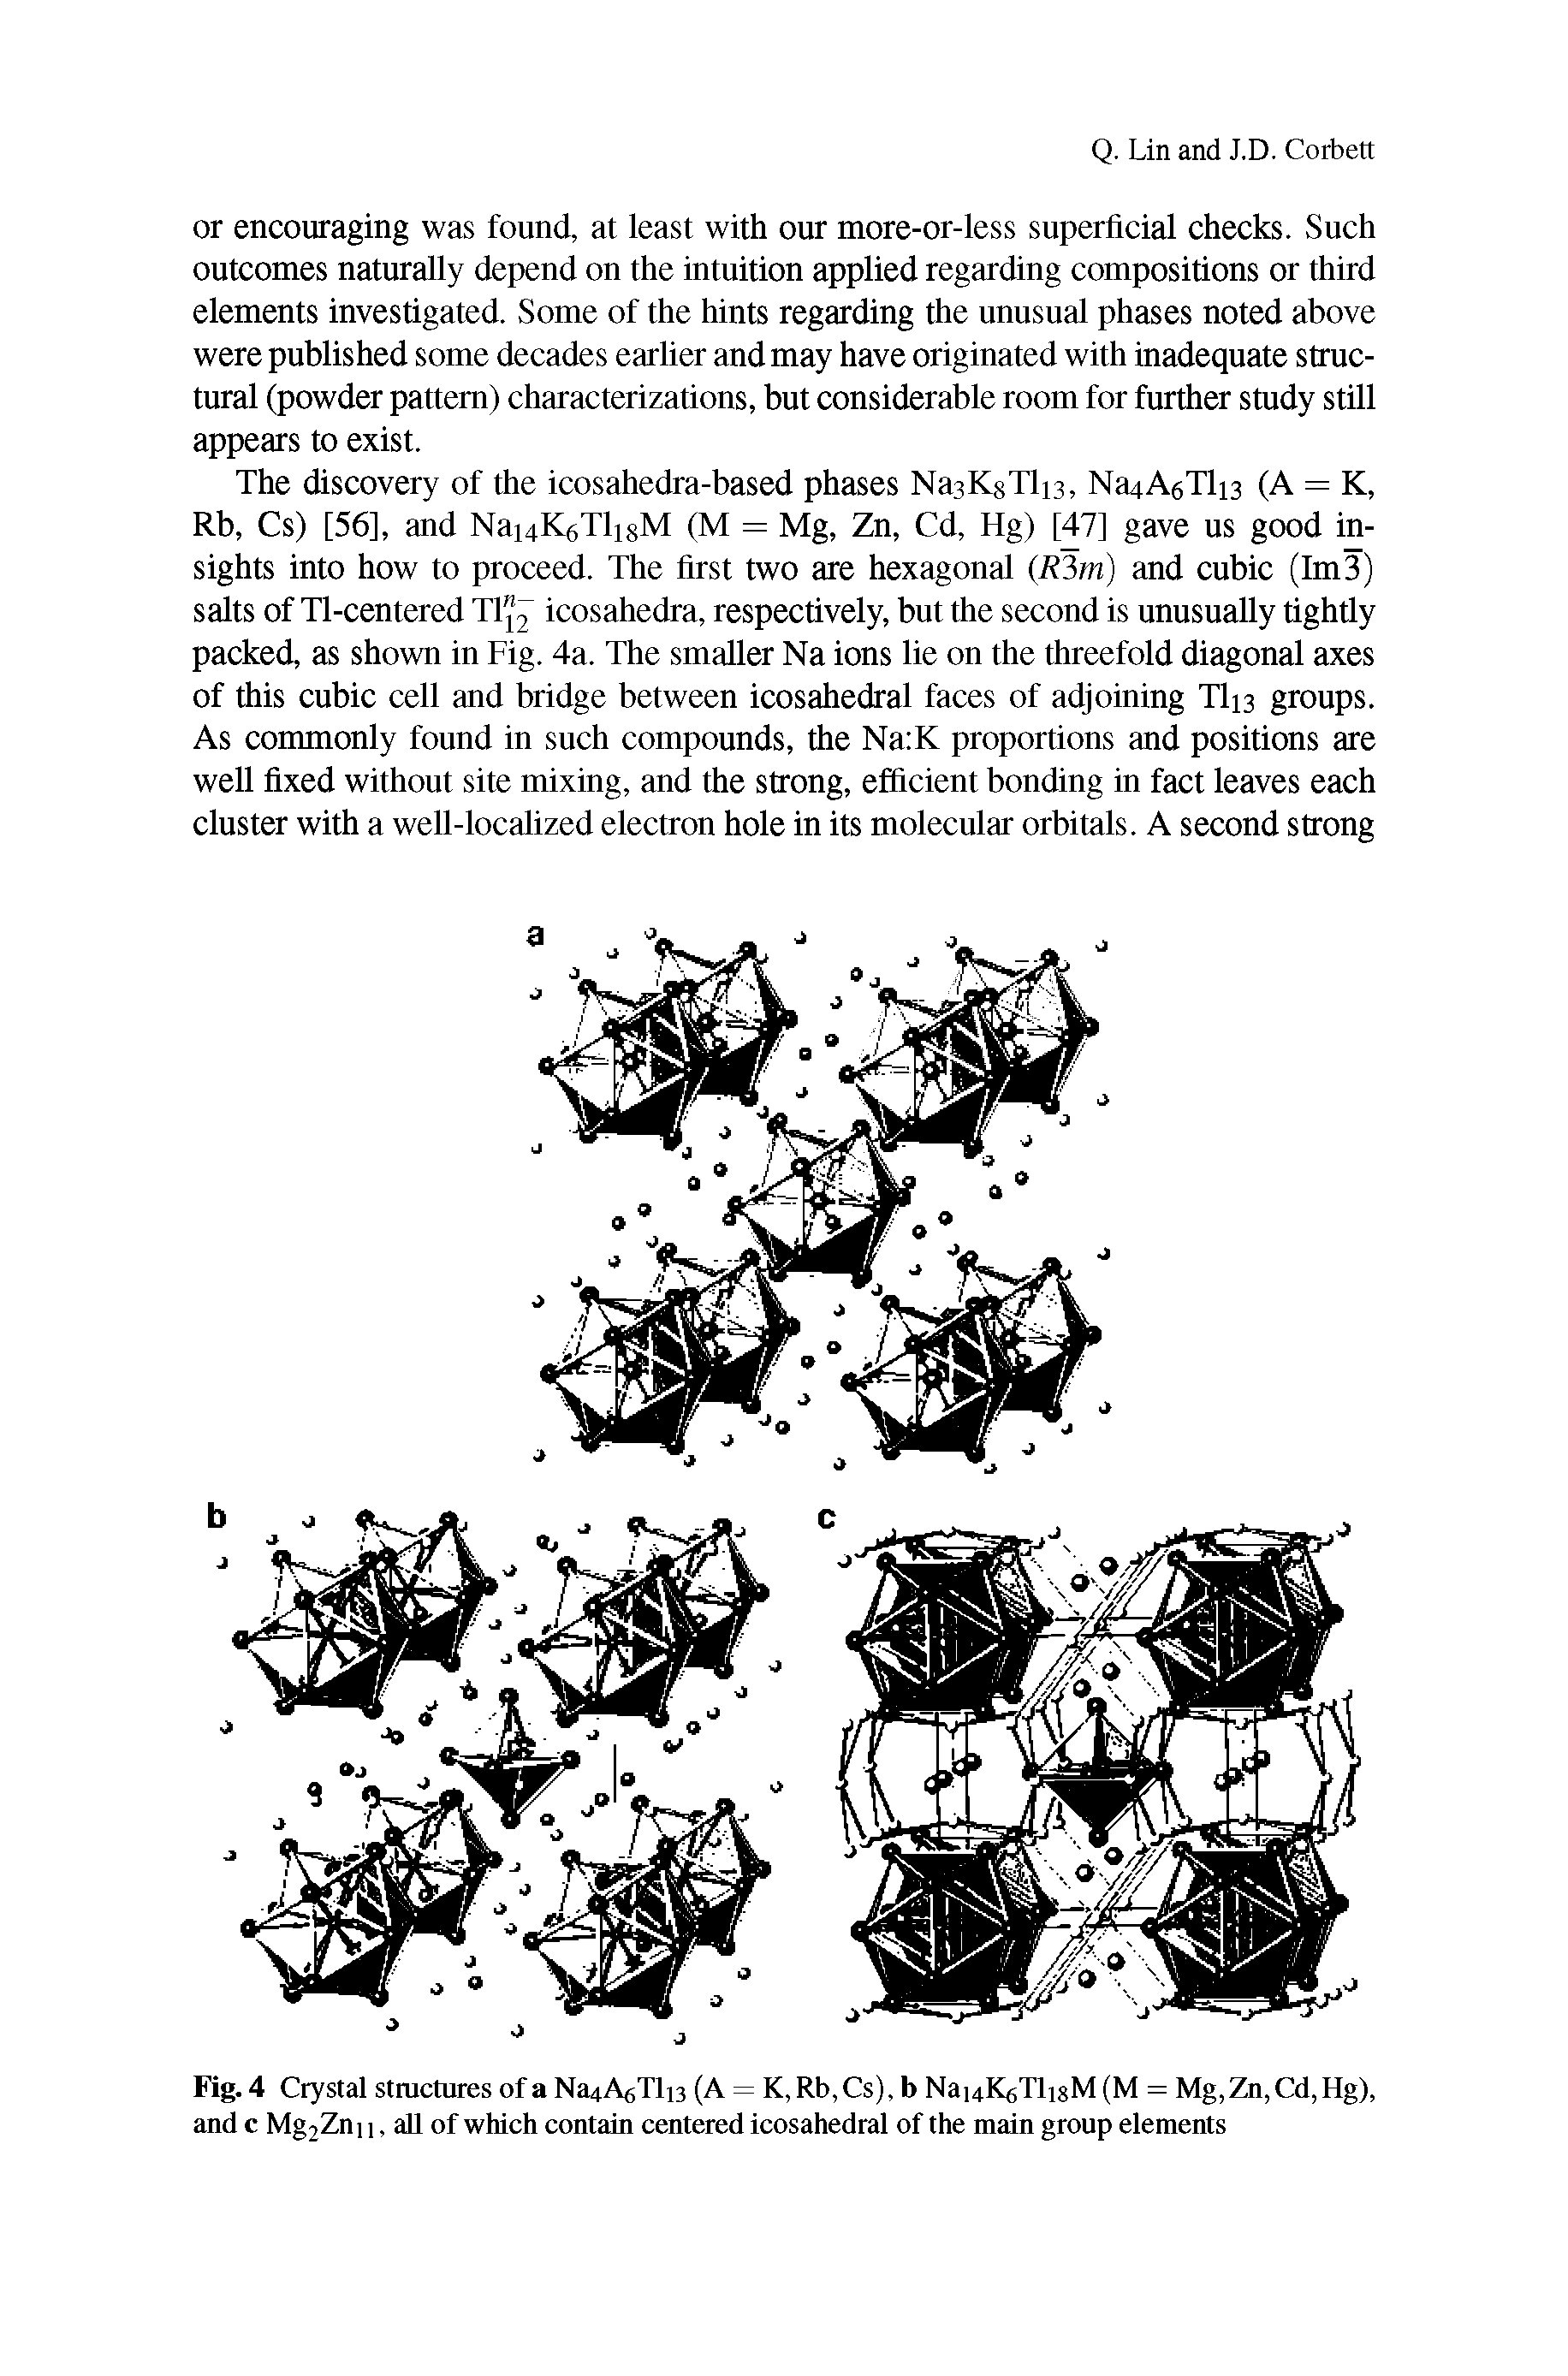 Fig. 4 Crystal structures of alS AgTlB (A = K,Rb,Cs), b NauKgTlisM (M = Mg,Zn,Cd,Hg), and c Mg2Zni 1, all of which contain centered icosahedral of the main group elements...